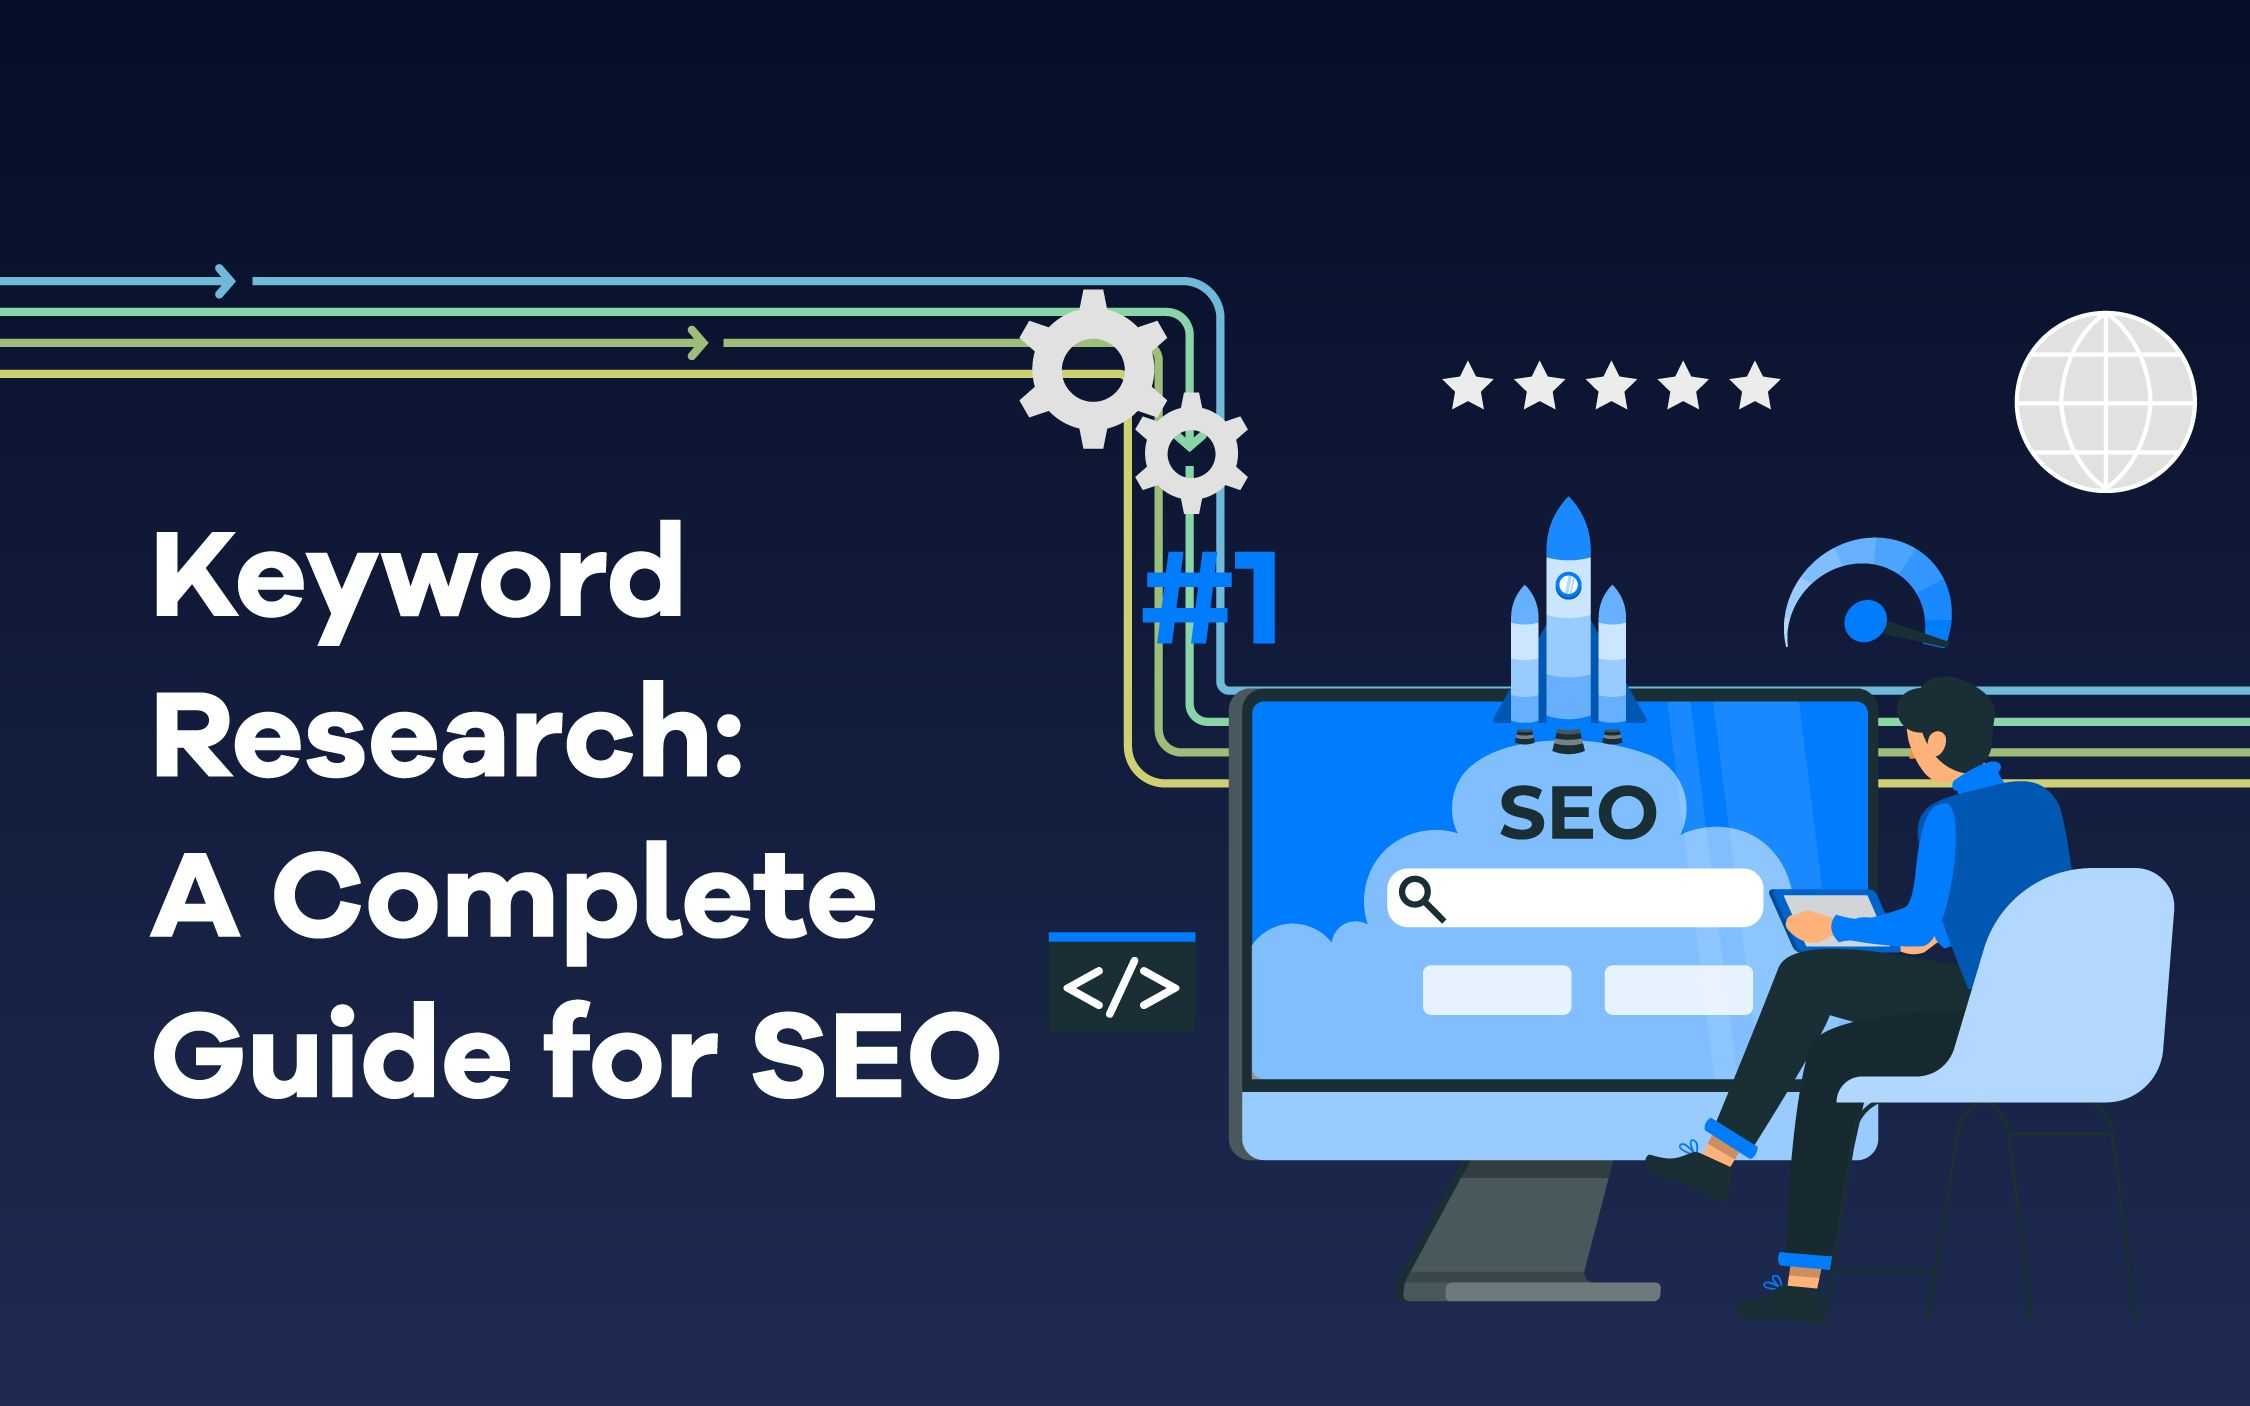 Keyword Research: A Complete Guide for SEO